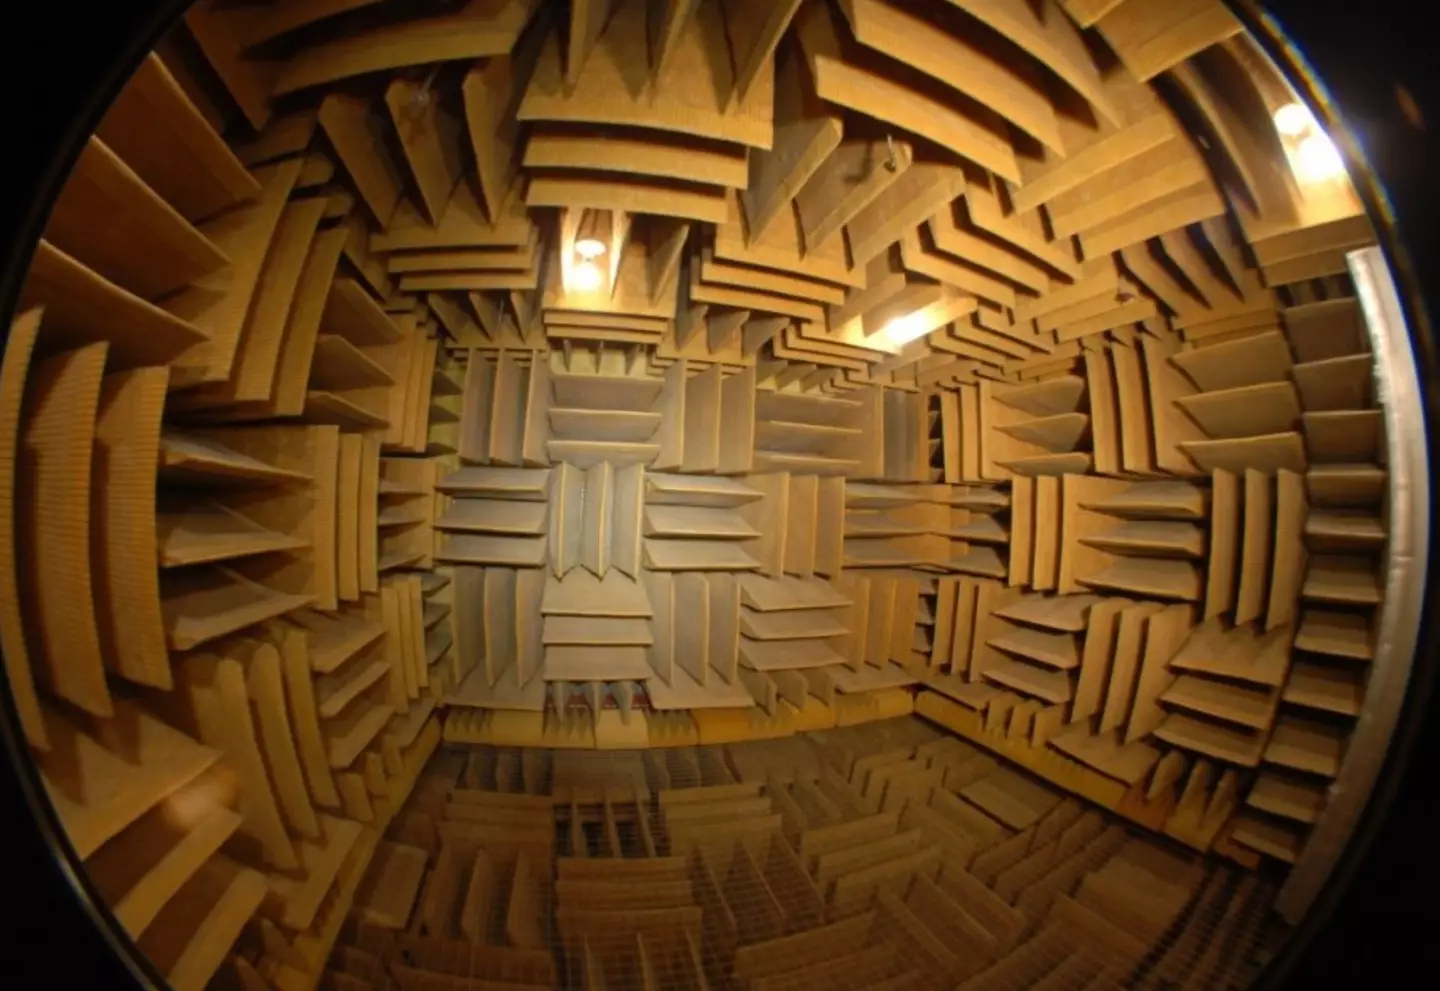 The quietist room in the world.